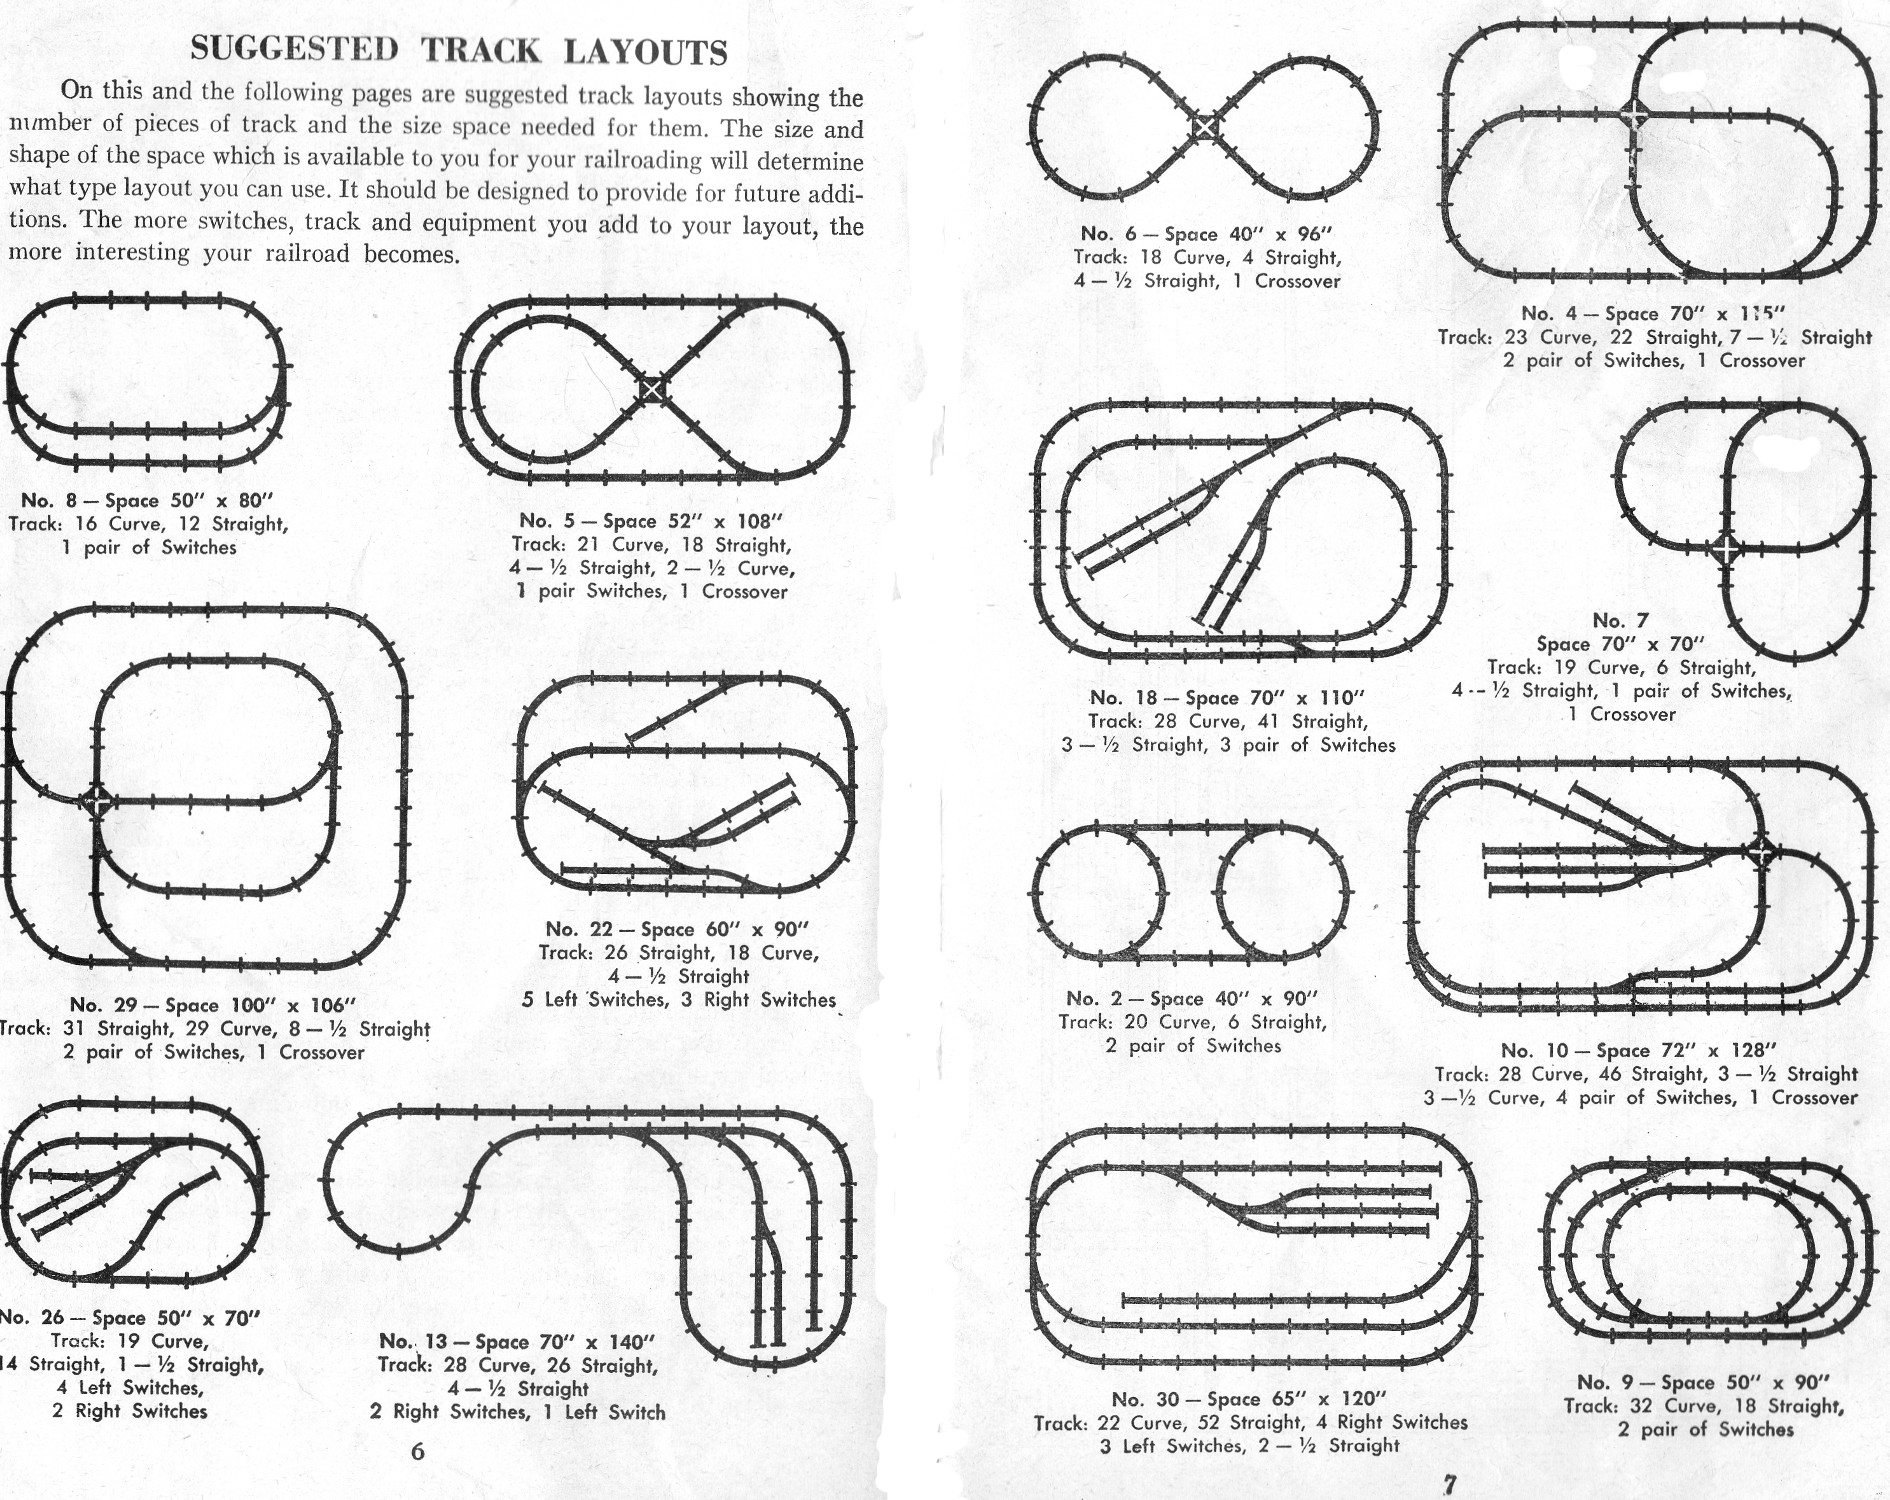 American Flyer Suggested Track Layouts